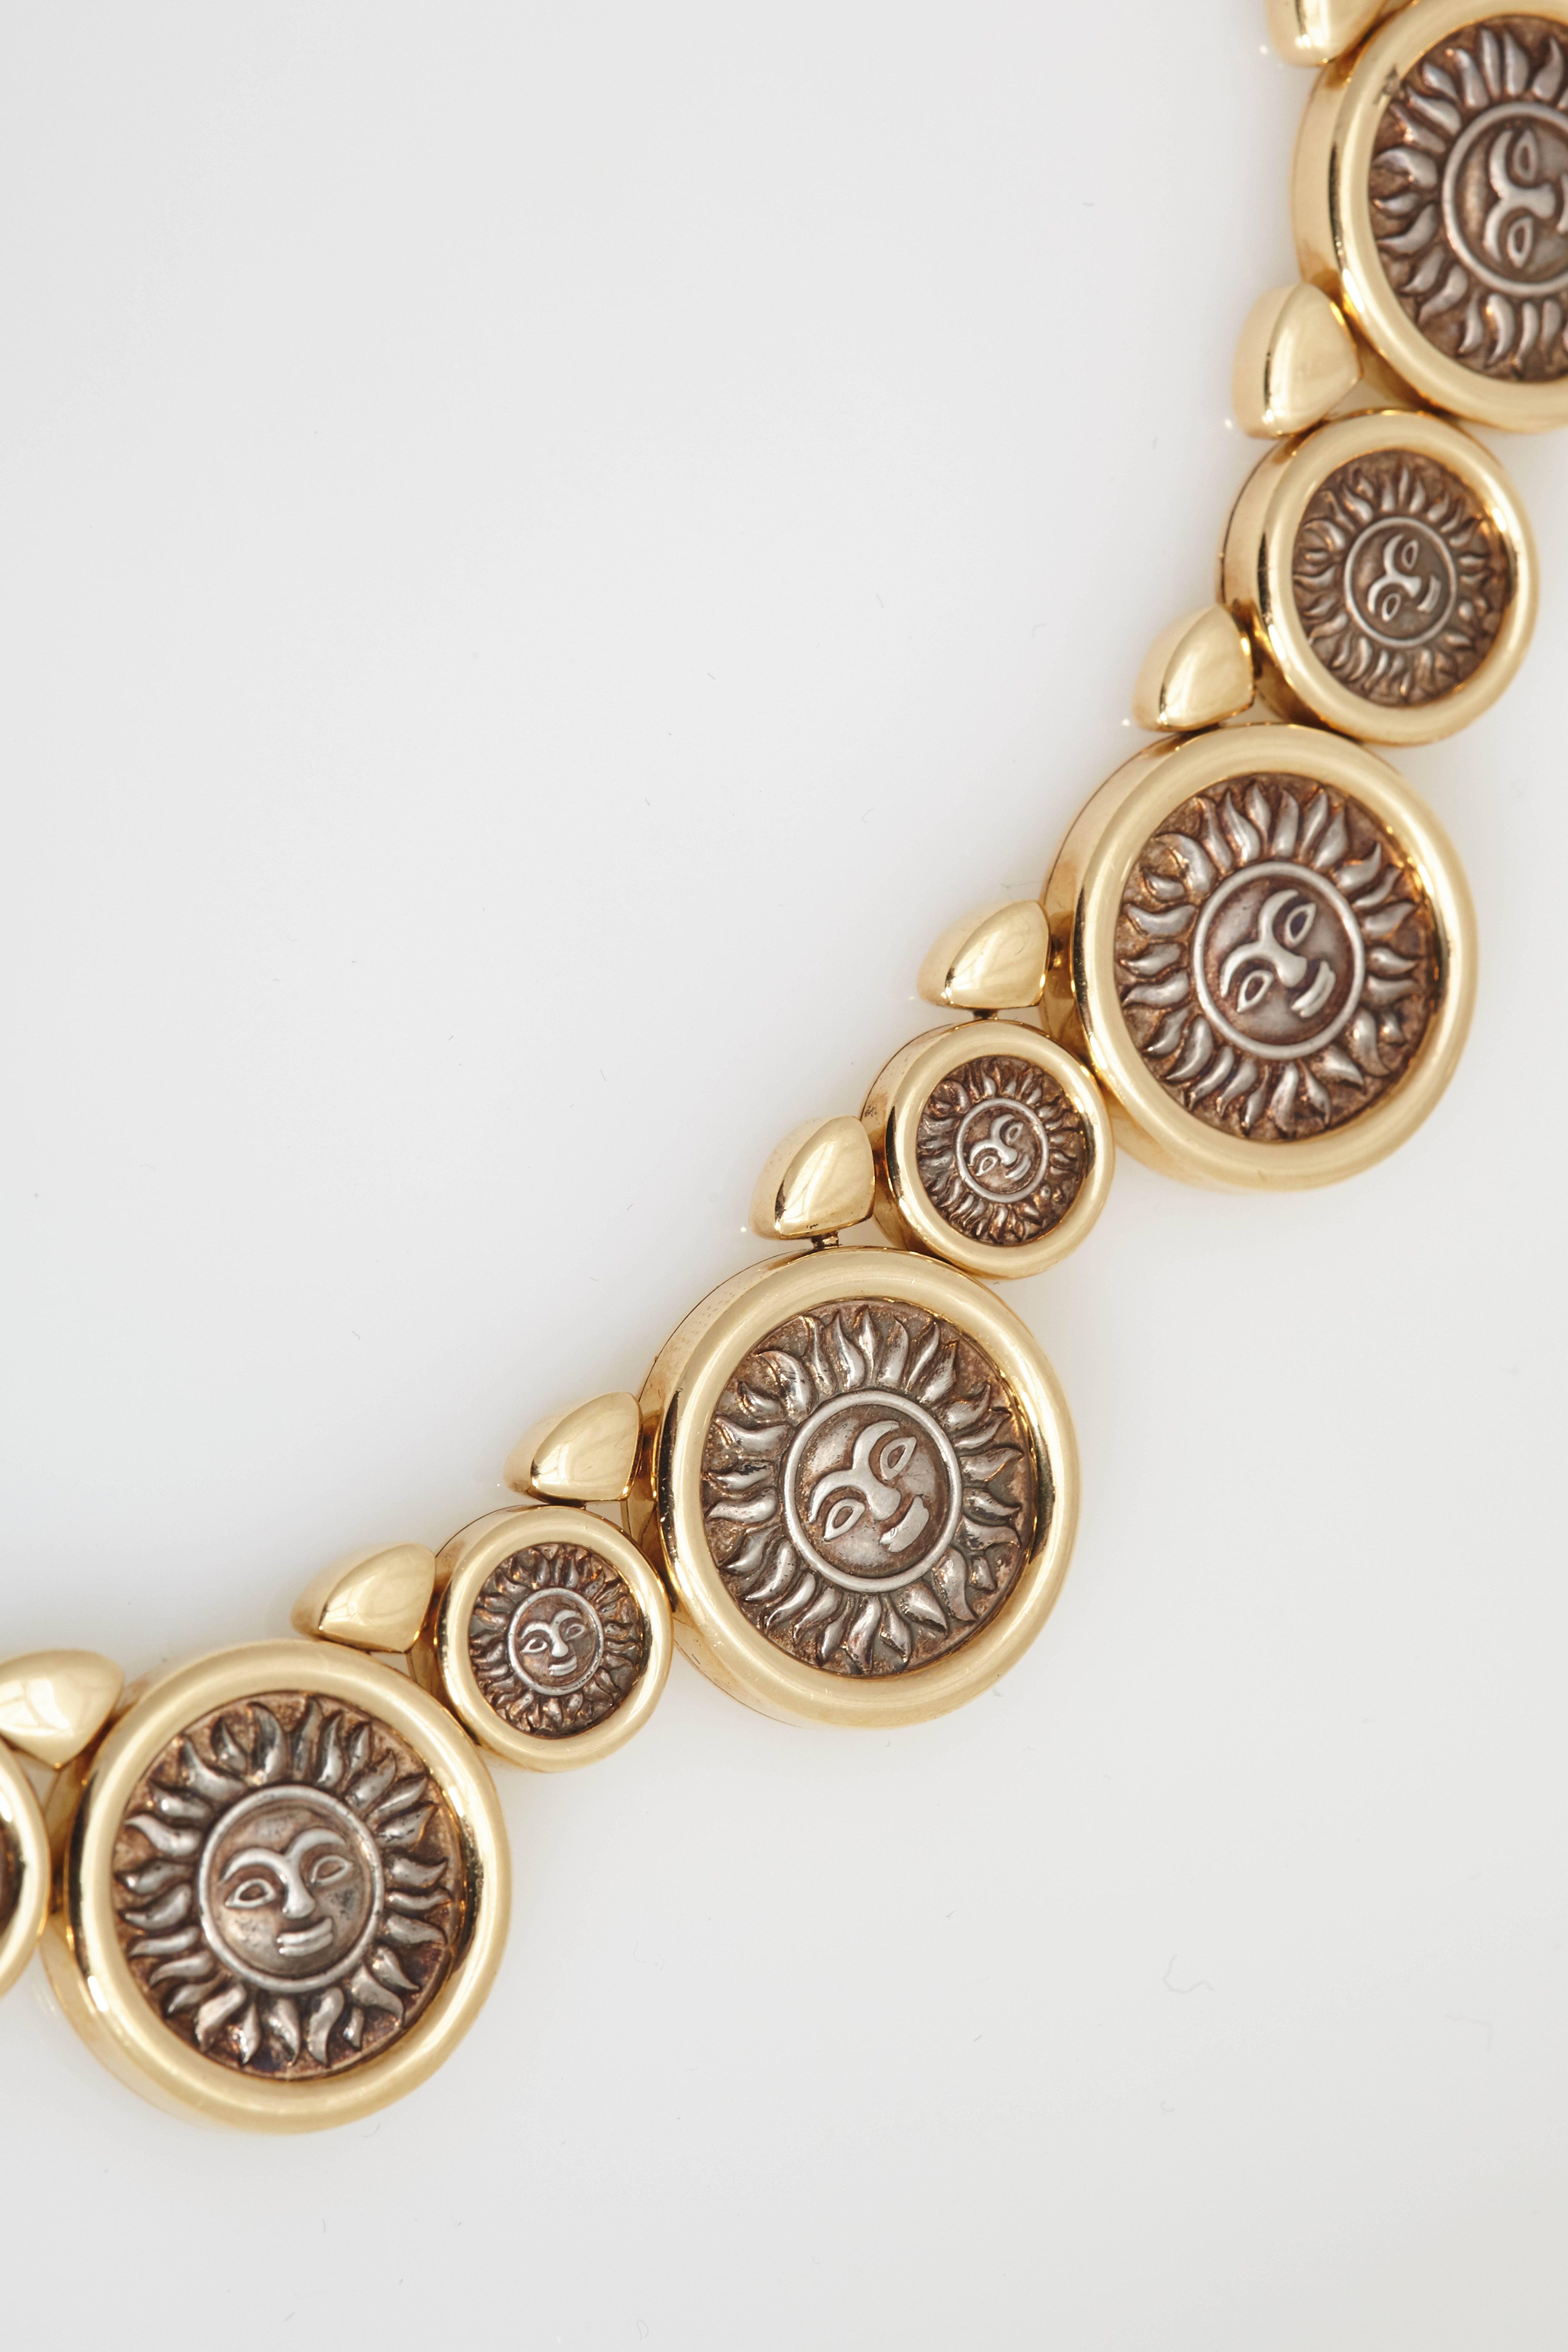 An iconic necklace by Marina B, with interlinked small and larger solar coin elements, mounted on 18kt yellow gold. Made in Italy, circa 1983